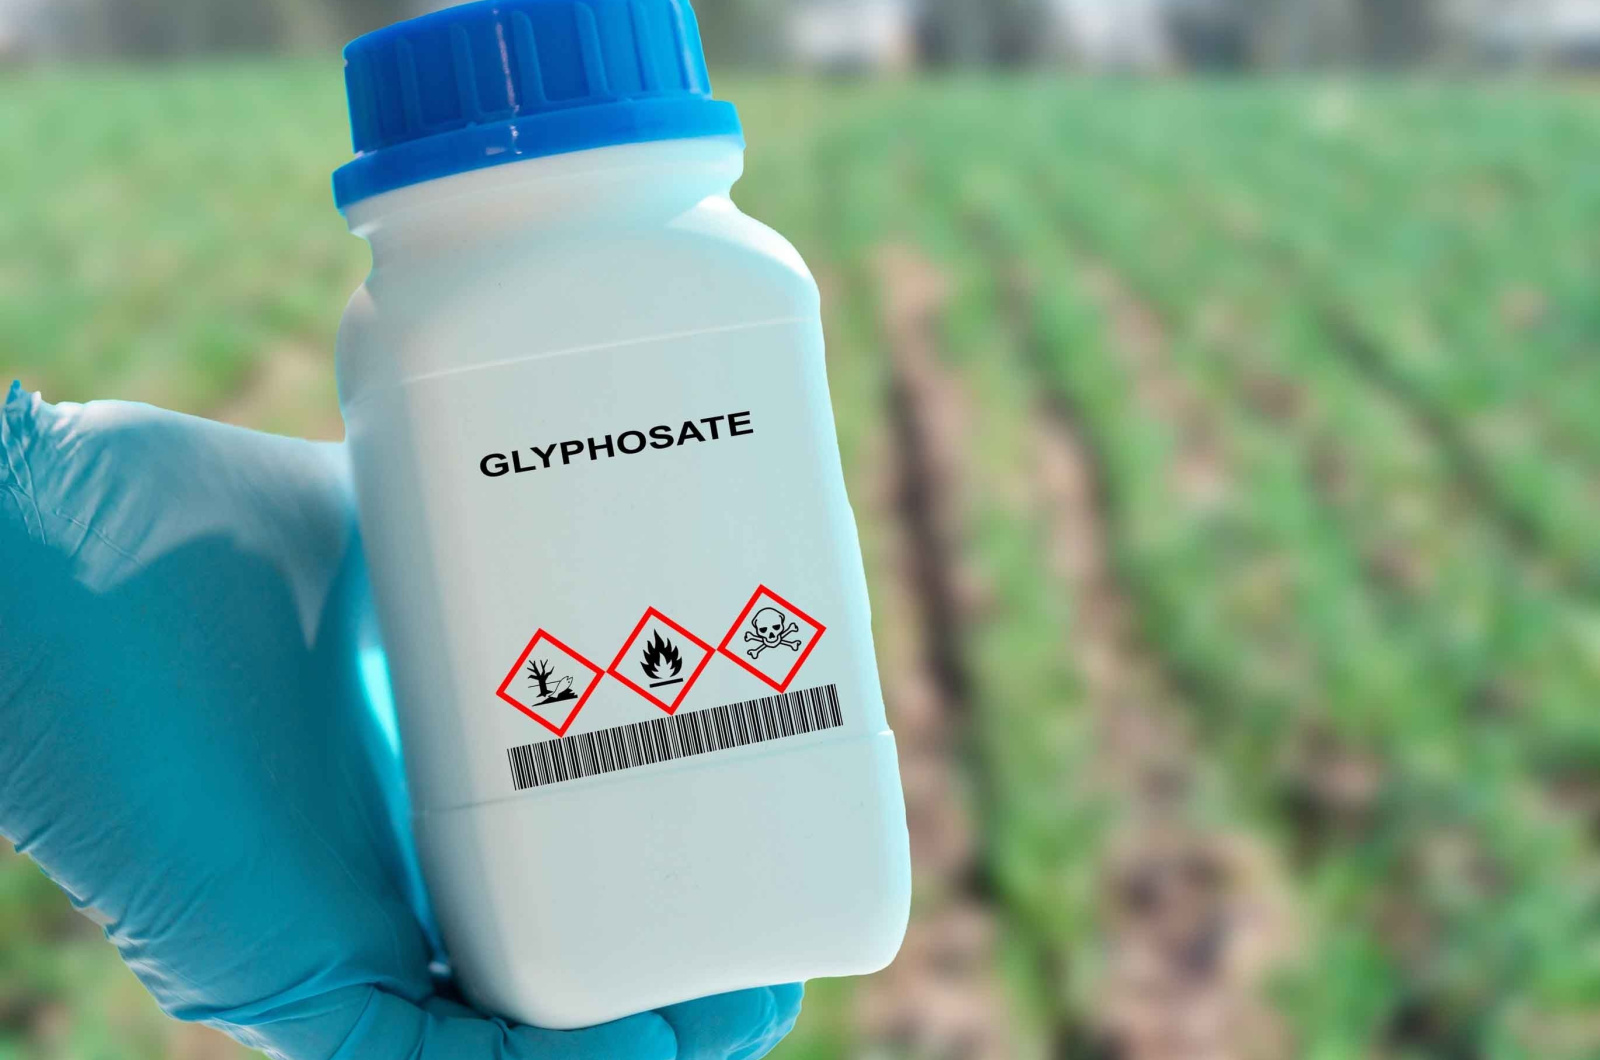 glyphosate herbicide used to control weeds in crops